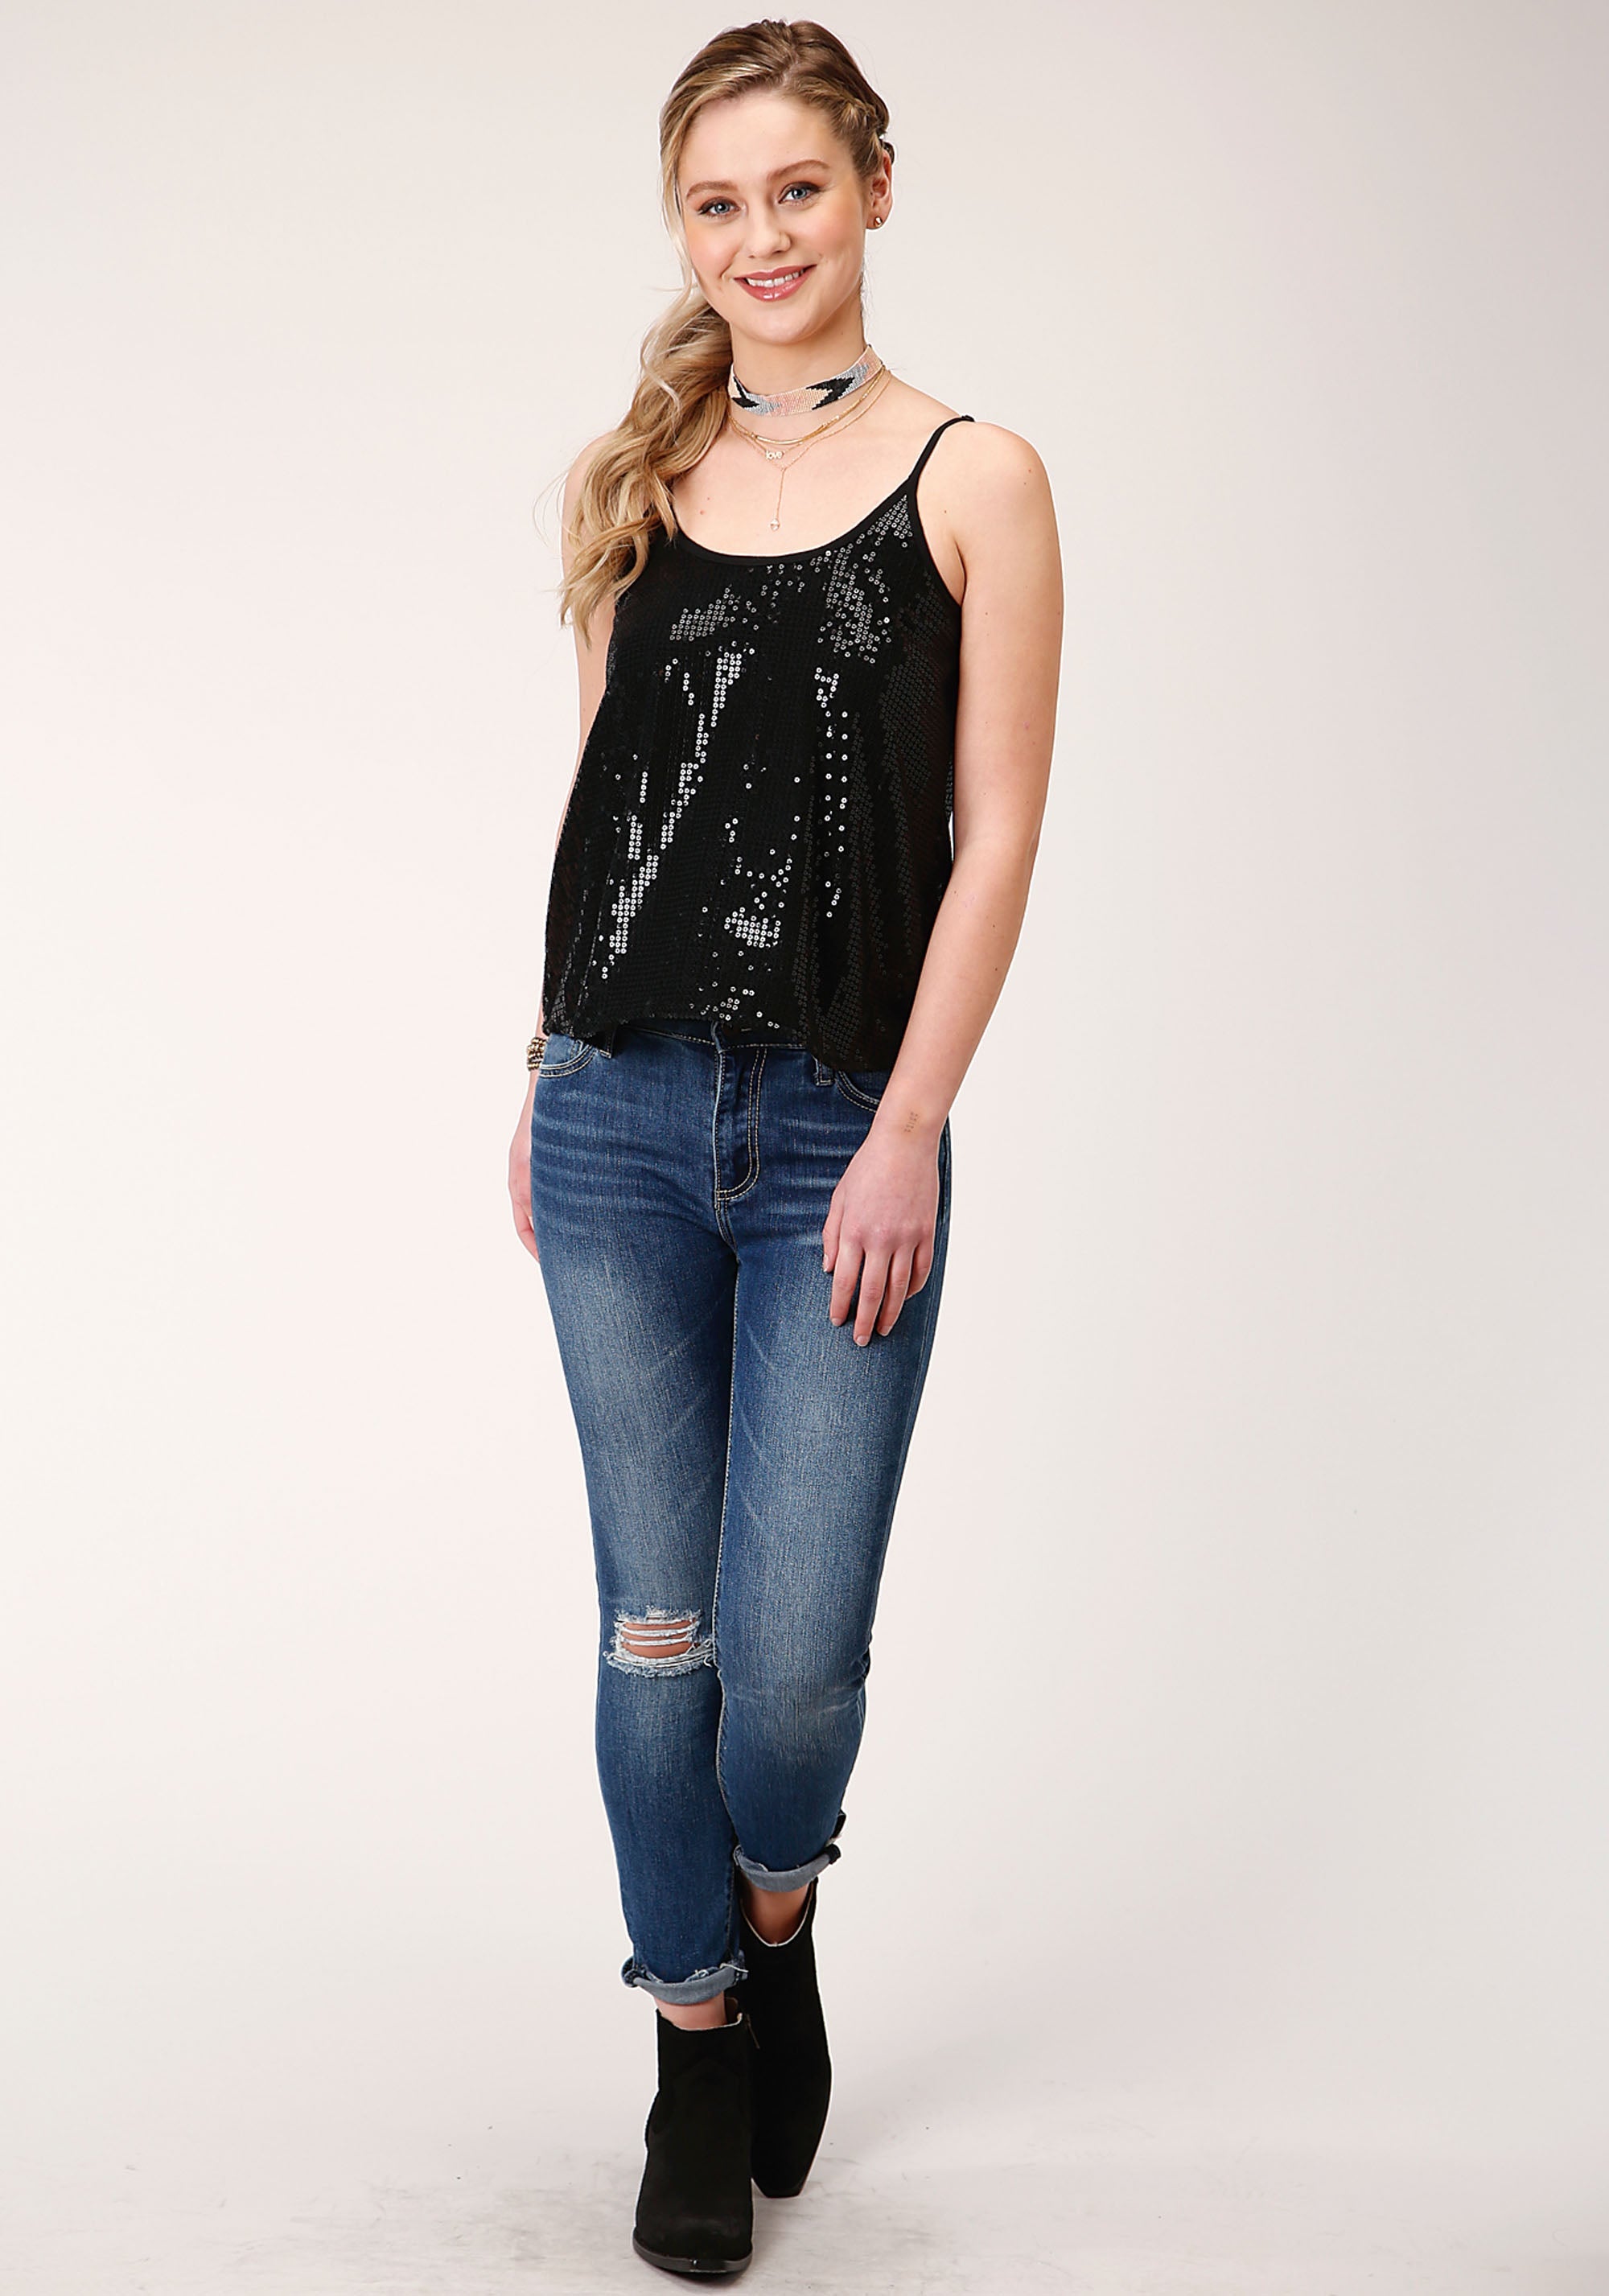 Roper Womens Sleeveless Solid Black Sequin Cami Blouse